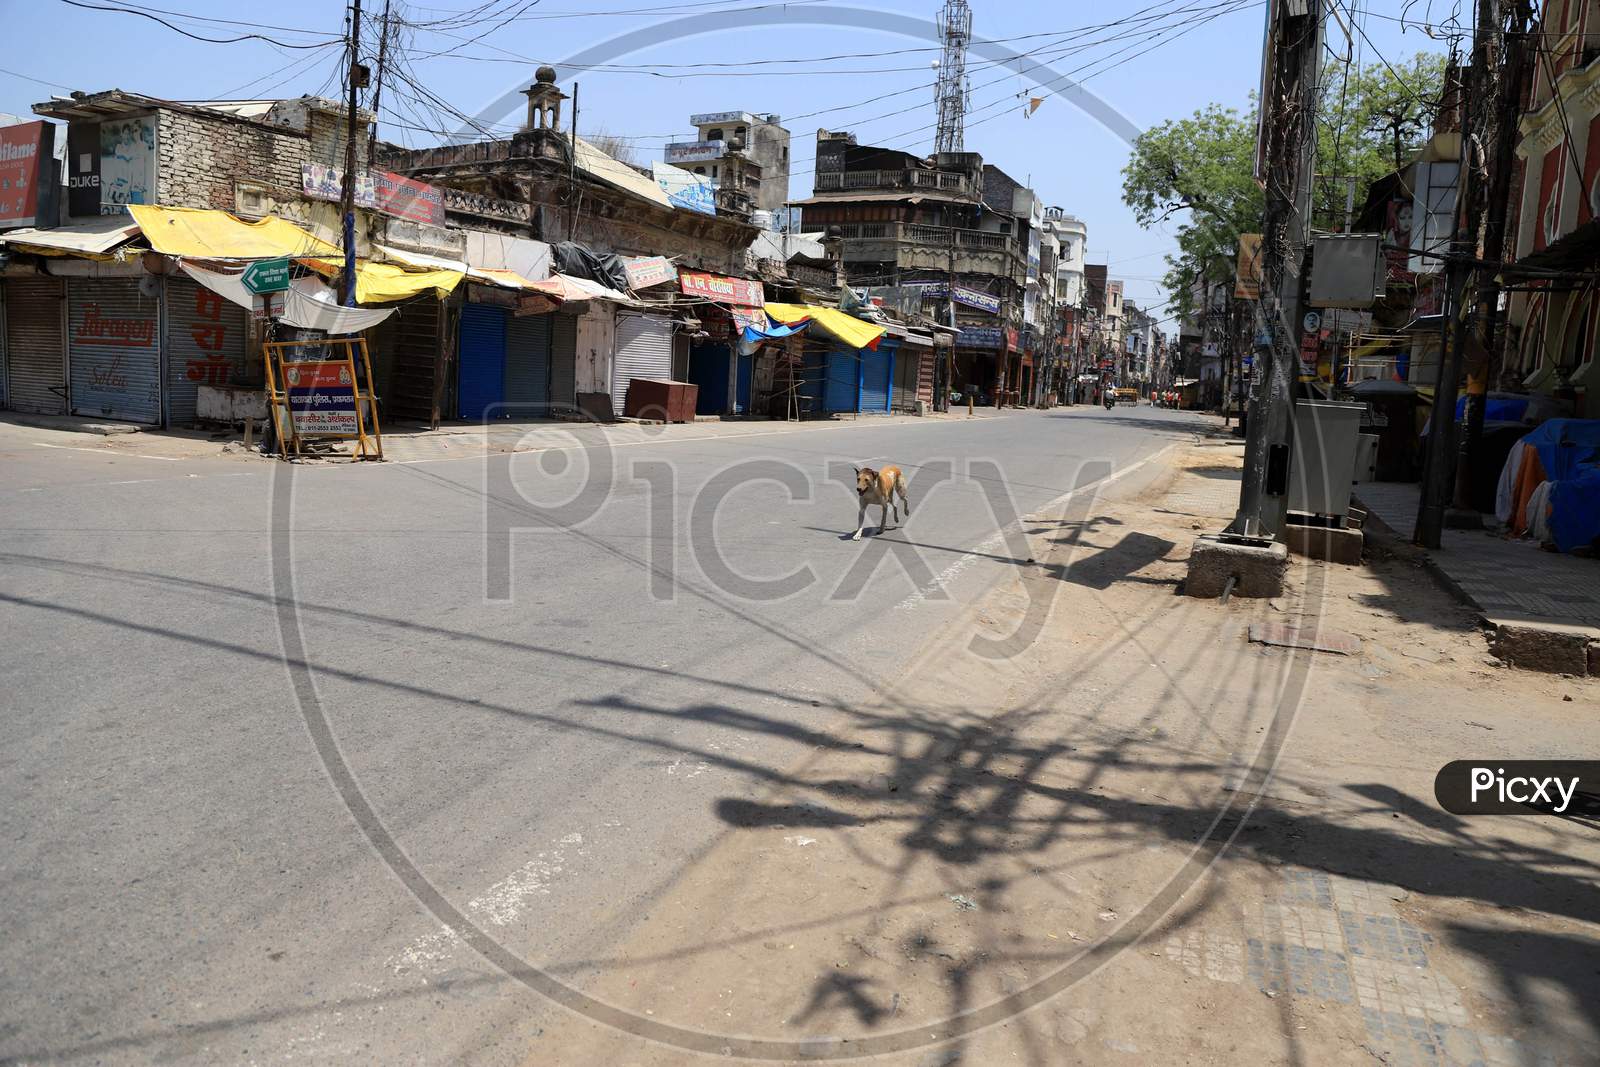 A Dog Running On Empty Road During A Nationwide Lockdown To Slow The Spreading Of The Coronavirus Disease (Covid-19), In Prayagraj, April, 18, 2020.